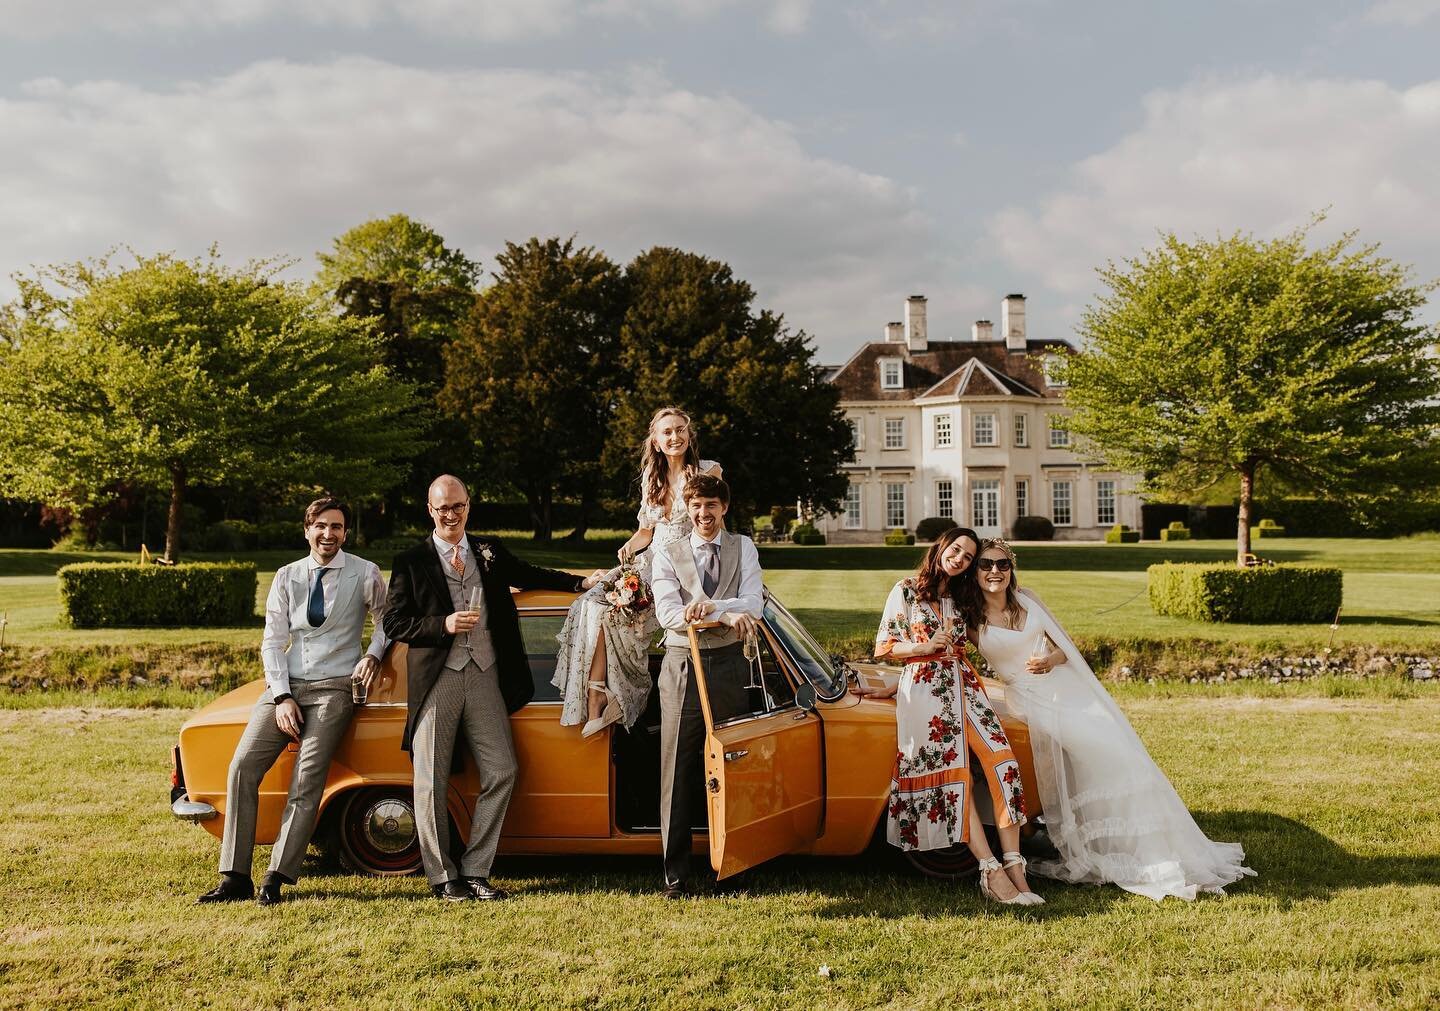 💛Photos💛

When the retro yellow wedding car takes centre stage, the perfect prop and backdrop for an epic photo with bride, groom and friends. We love seeing all of the wonderful and special moments captured during a wedding. 

📸 @colinianross

#w